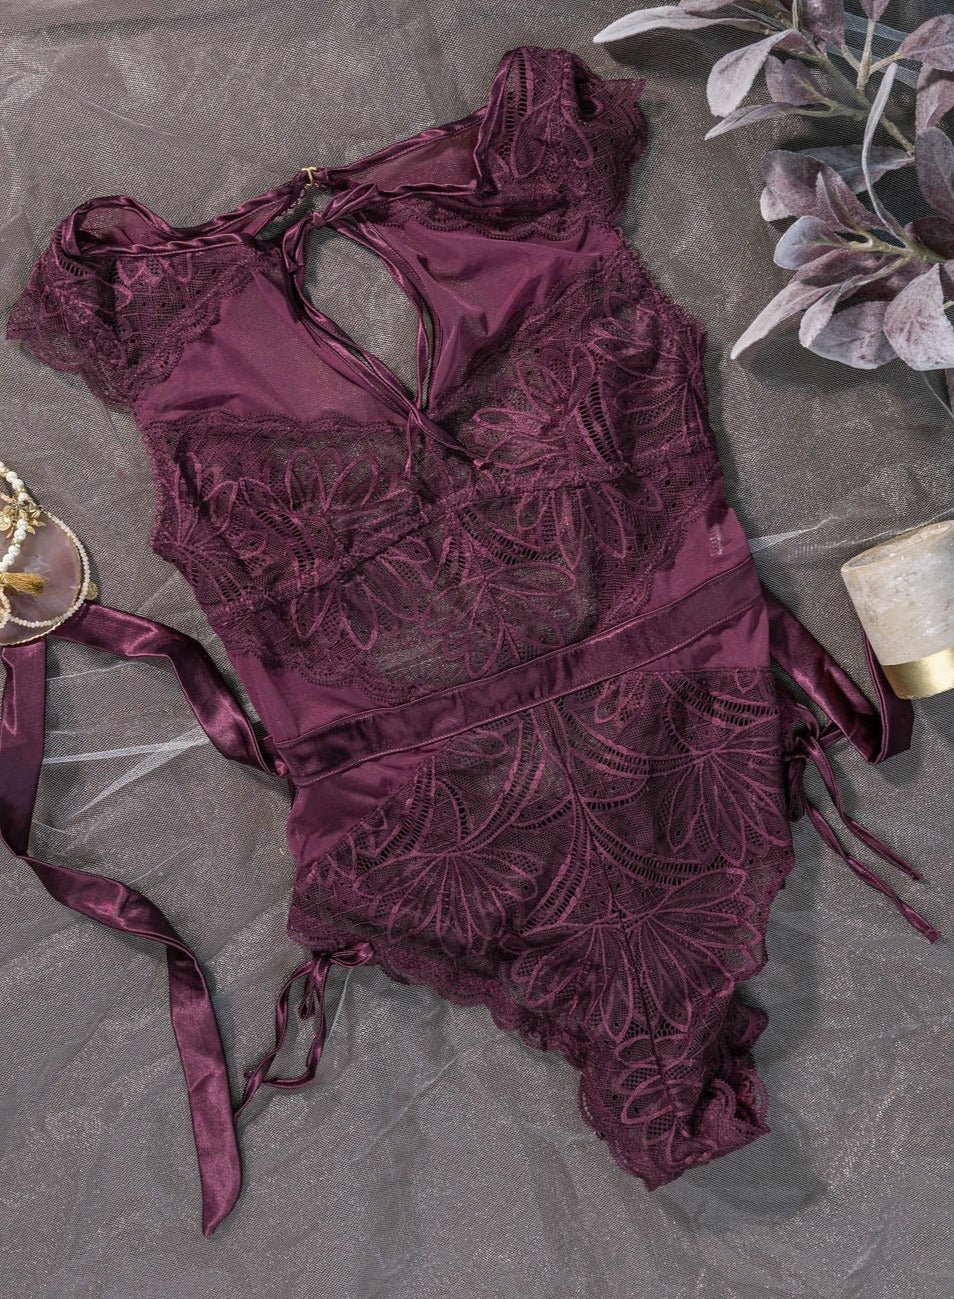 Lace & Mesh High Neck Teddy - Wine - Mentionables